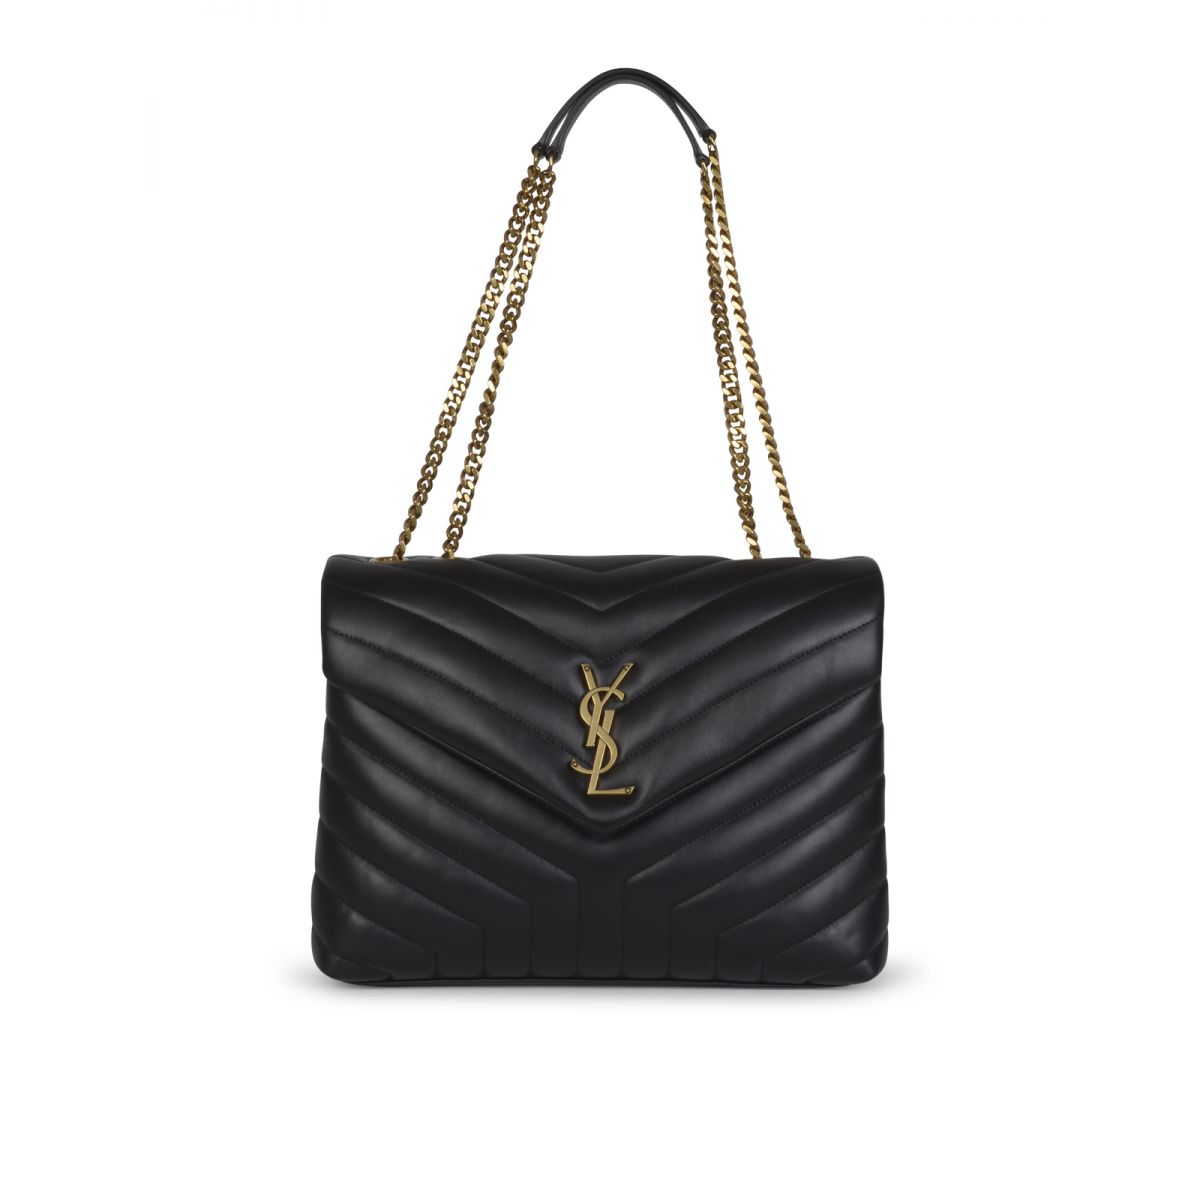 SAINT LAURENT - Loulou medium quilted leather bag in black